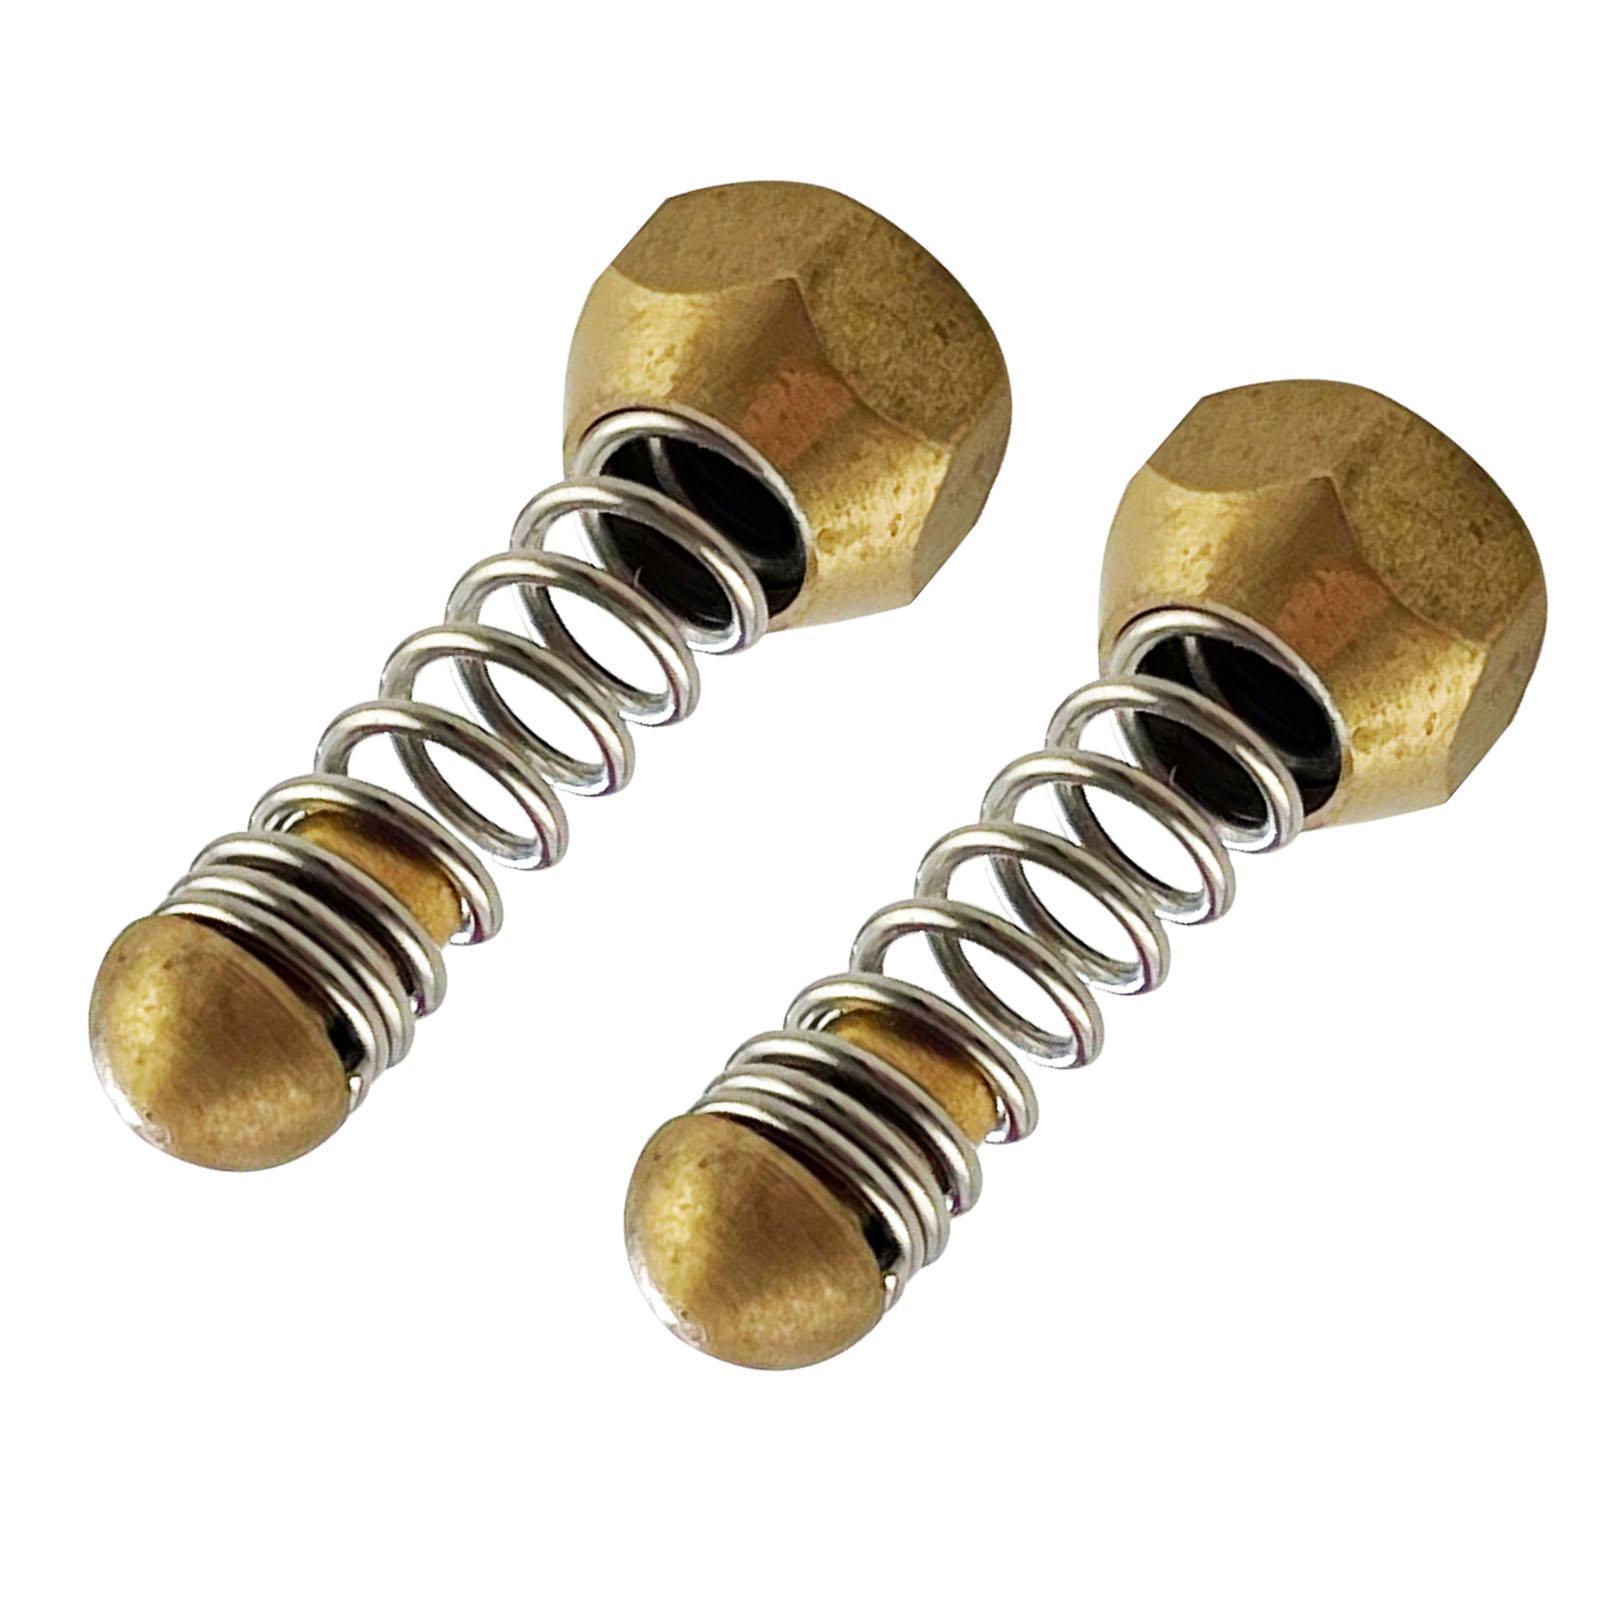 2 Pieces Sewer Jetting Pipe Nozzle with Spring for Pressure Washer Tool